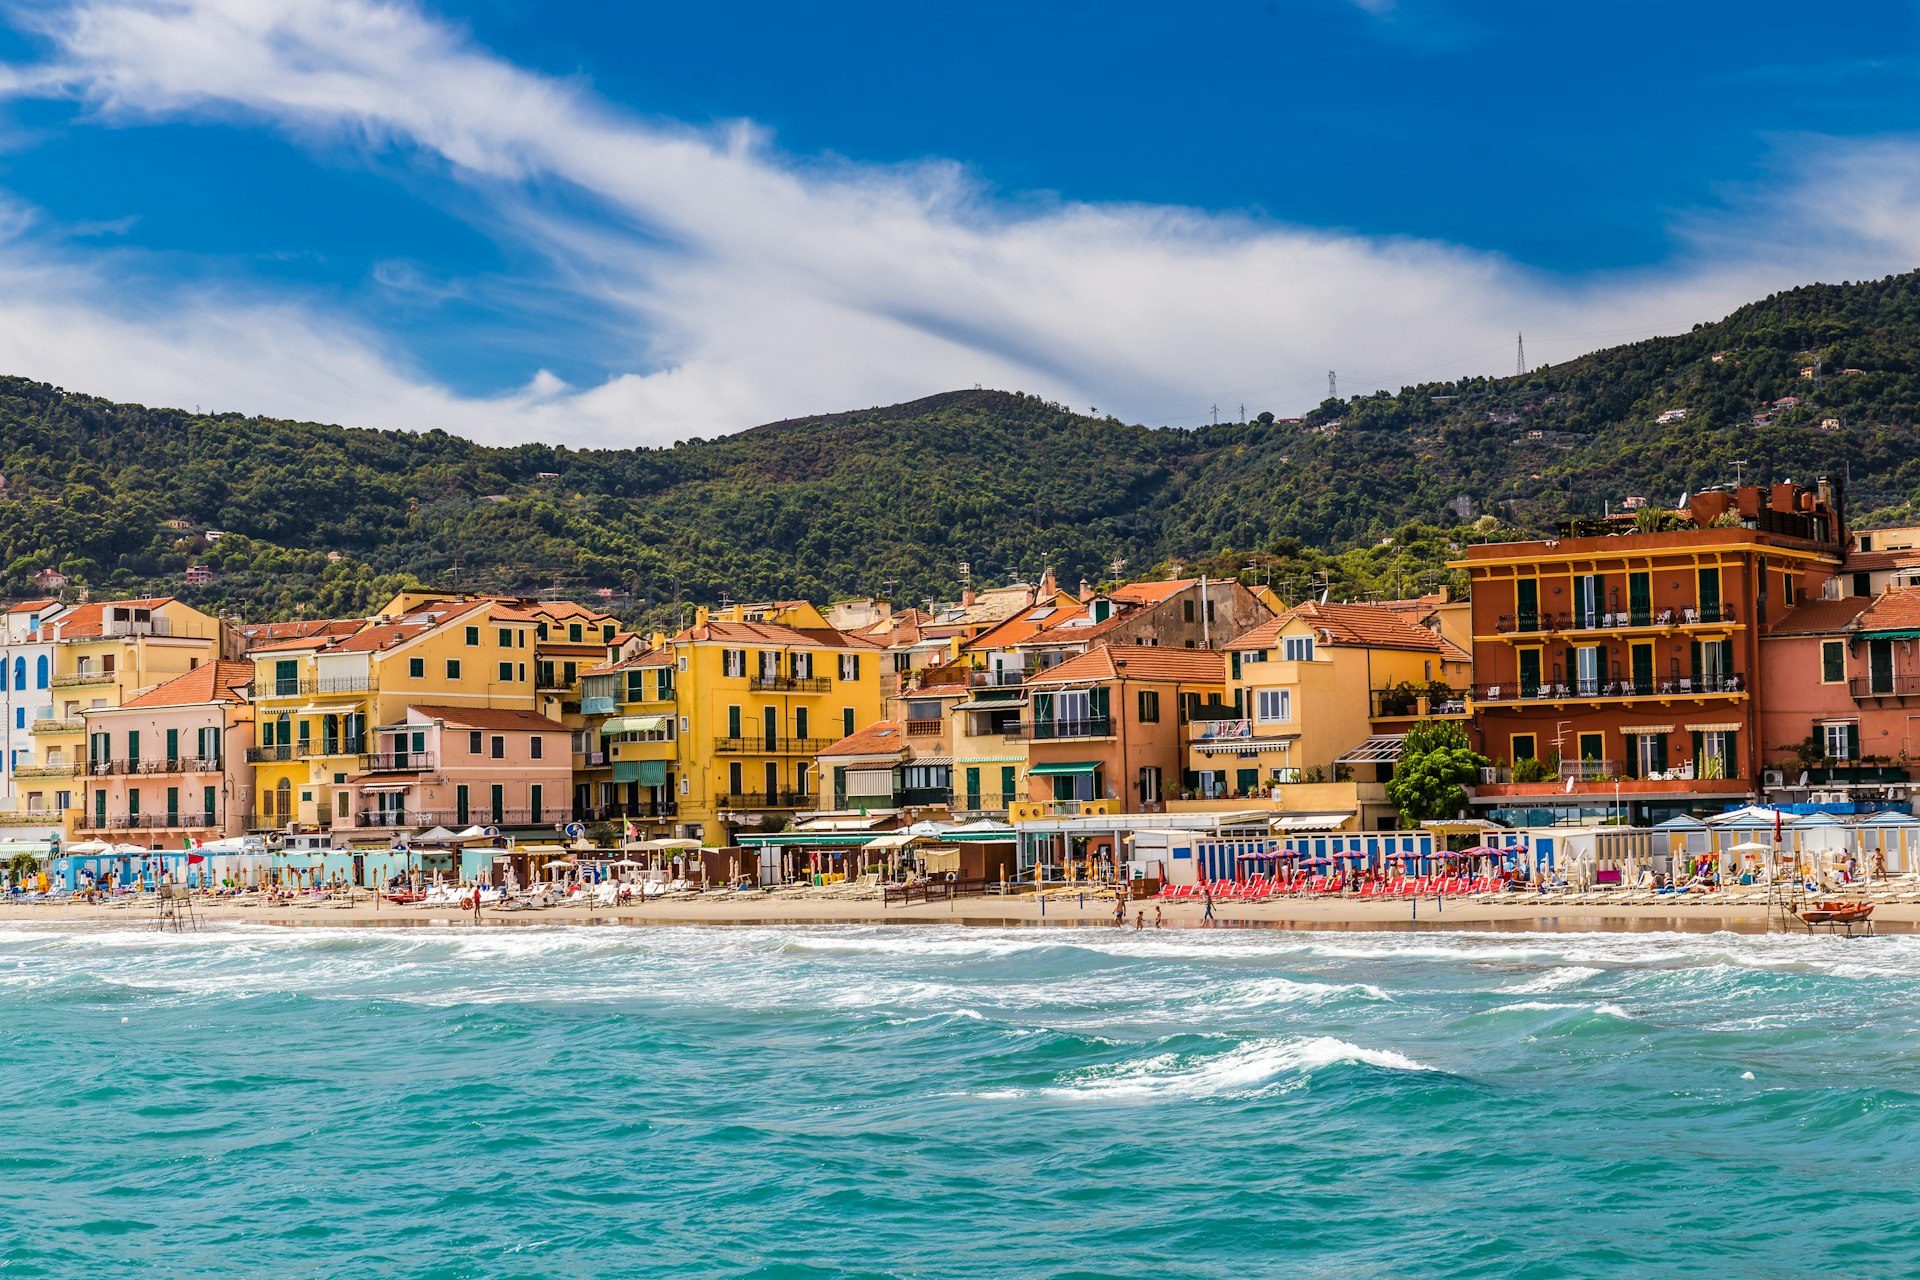 View of the Italian town of Alassio from the sea